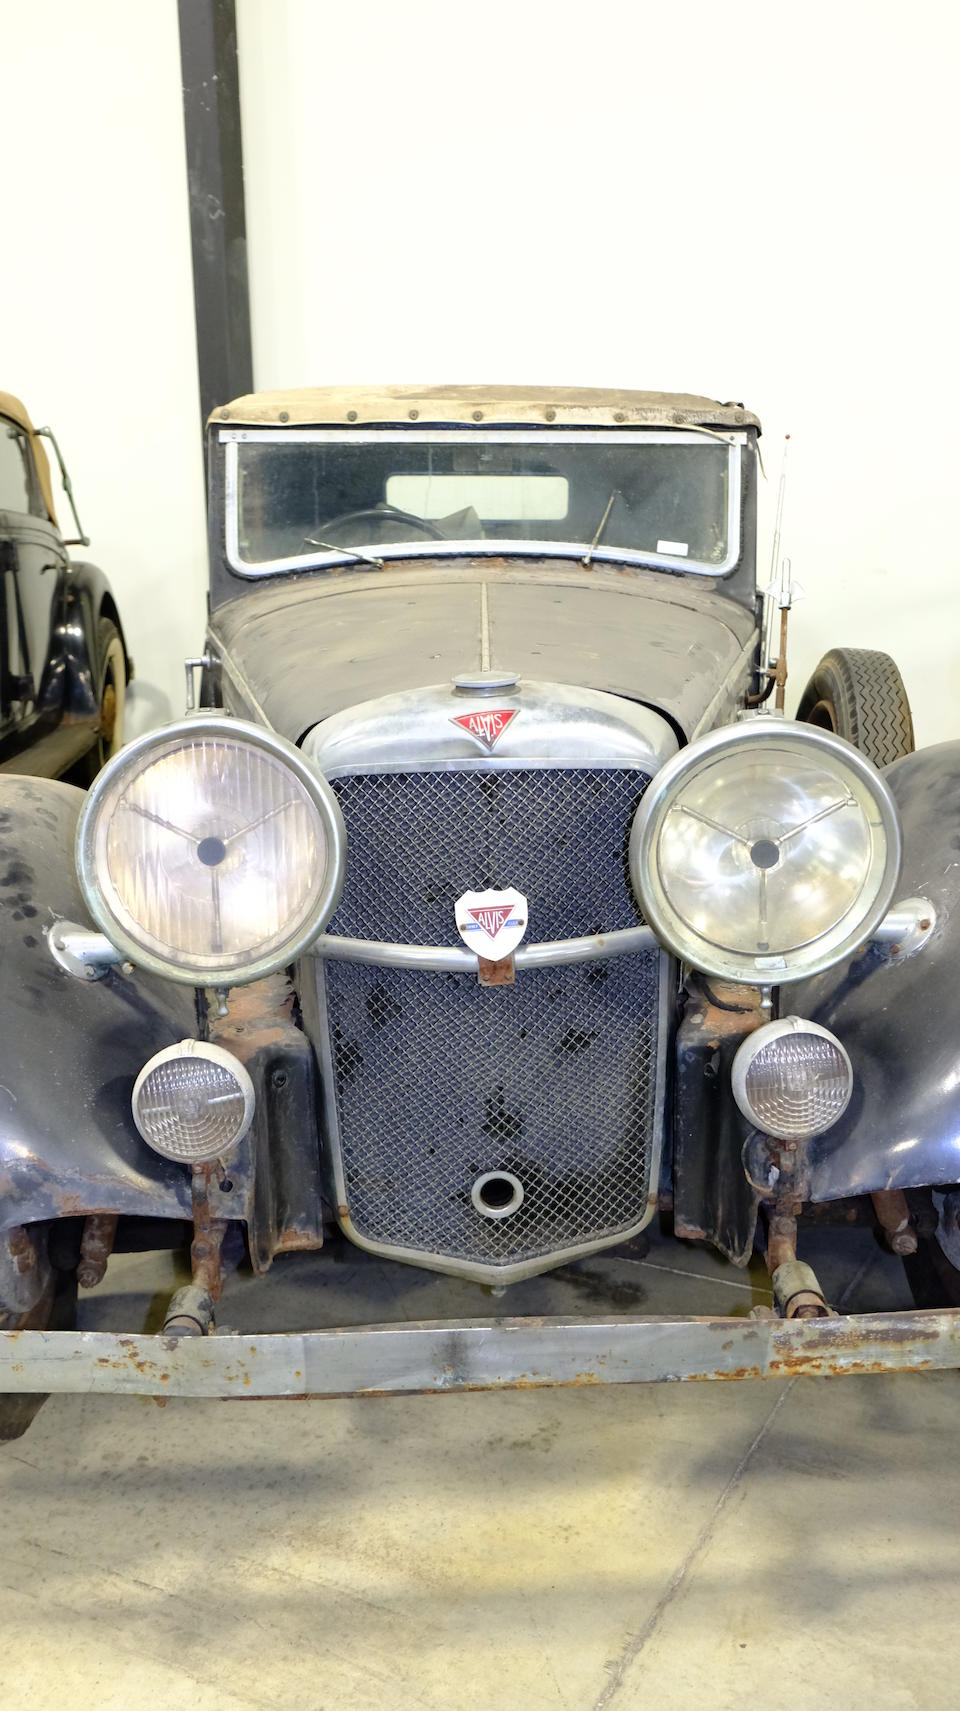 <b>1936 Alvis Speed 20 SD Drophead Coupe</b><br />Chassis no. 13298<br />Engine no. 13749